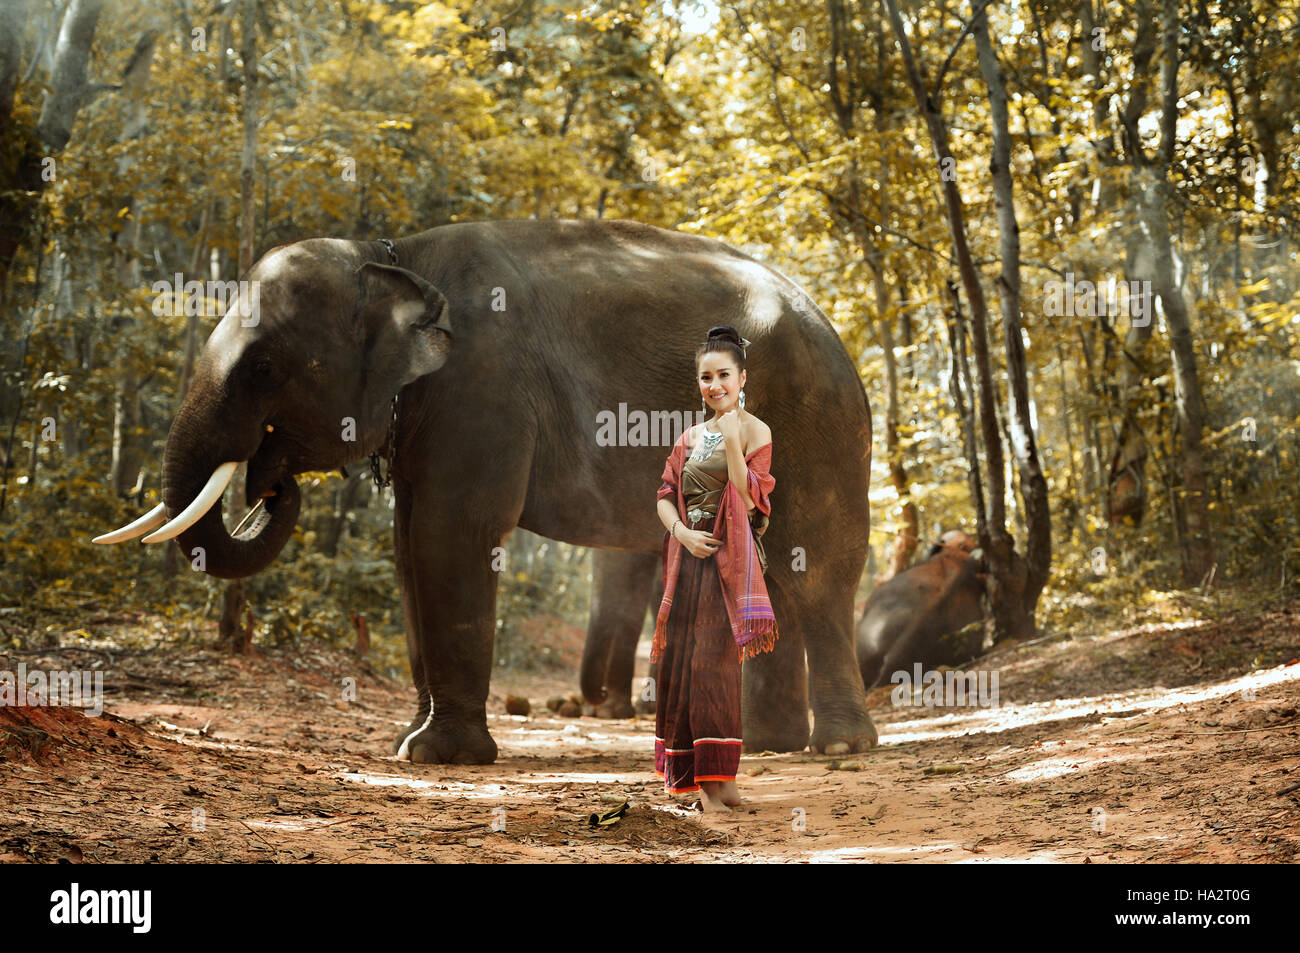 Portrait of a woman with an elephant, Thailand Stock Photo